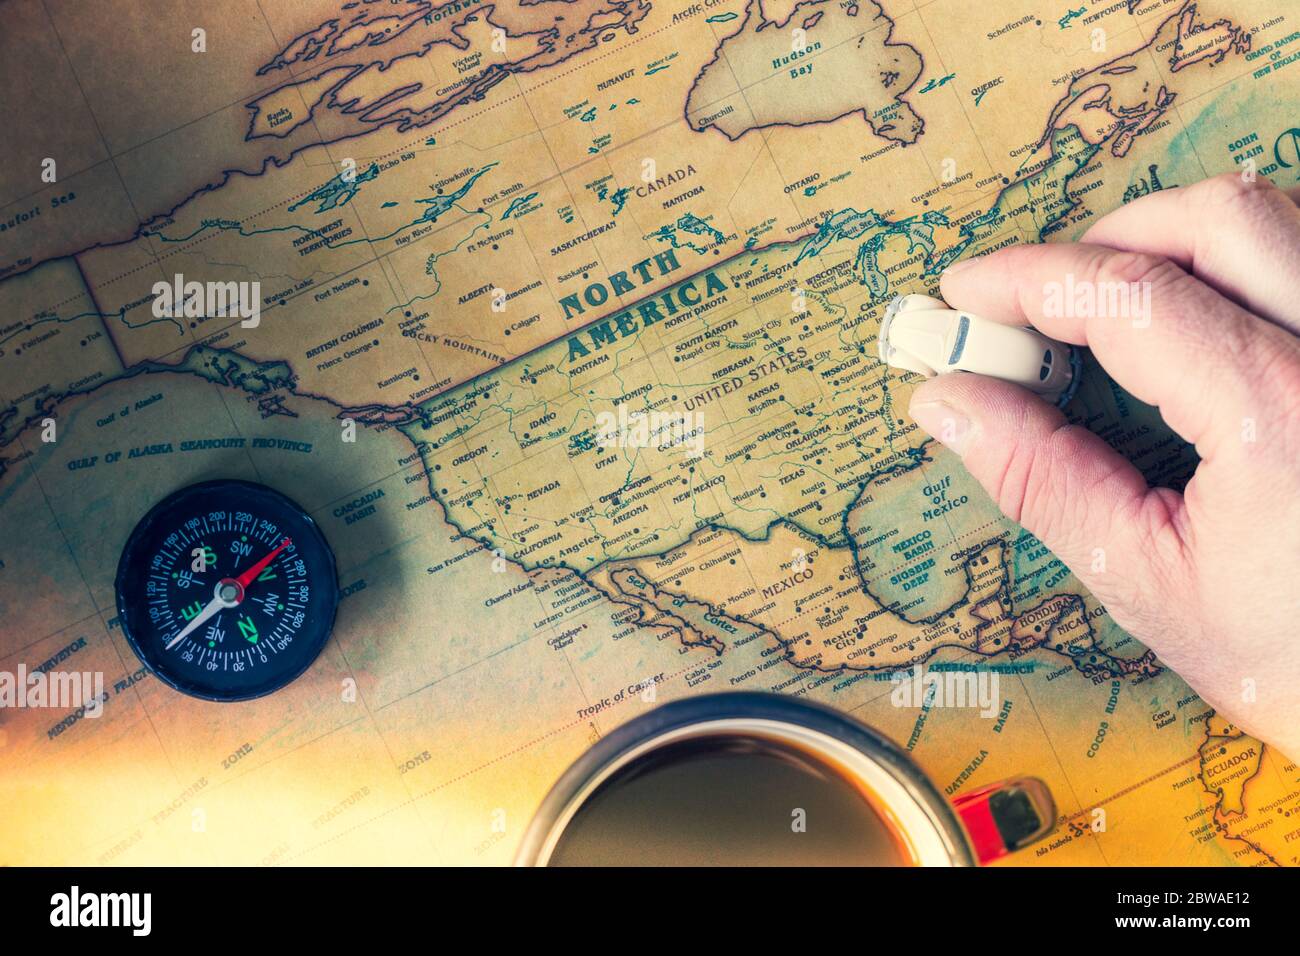 An old map of America with compass, a cup of tea and toy car in hand. Concept of traveling around the country in an old school style Stock Photo